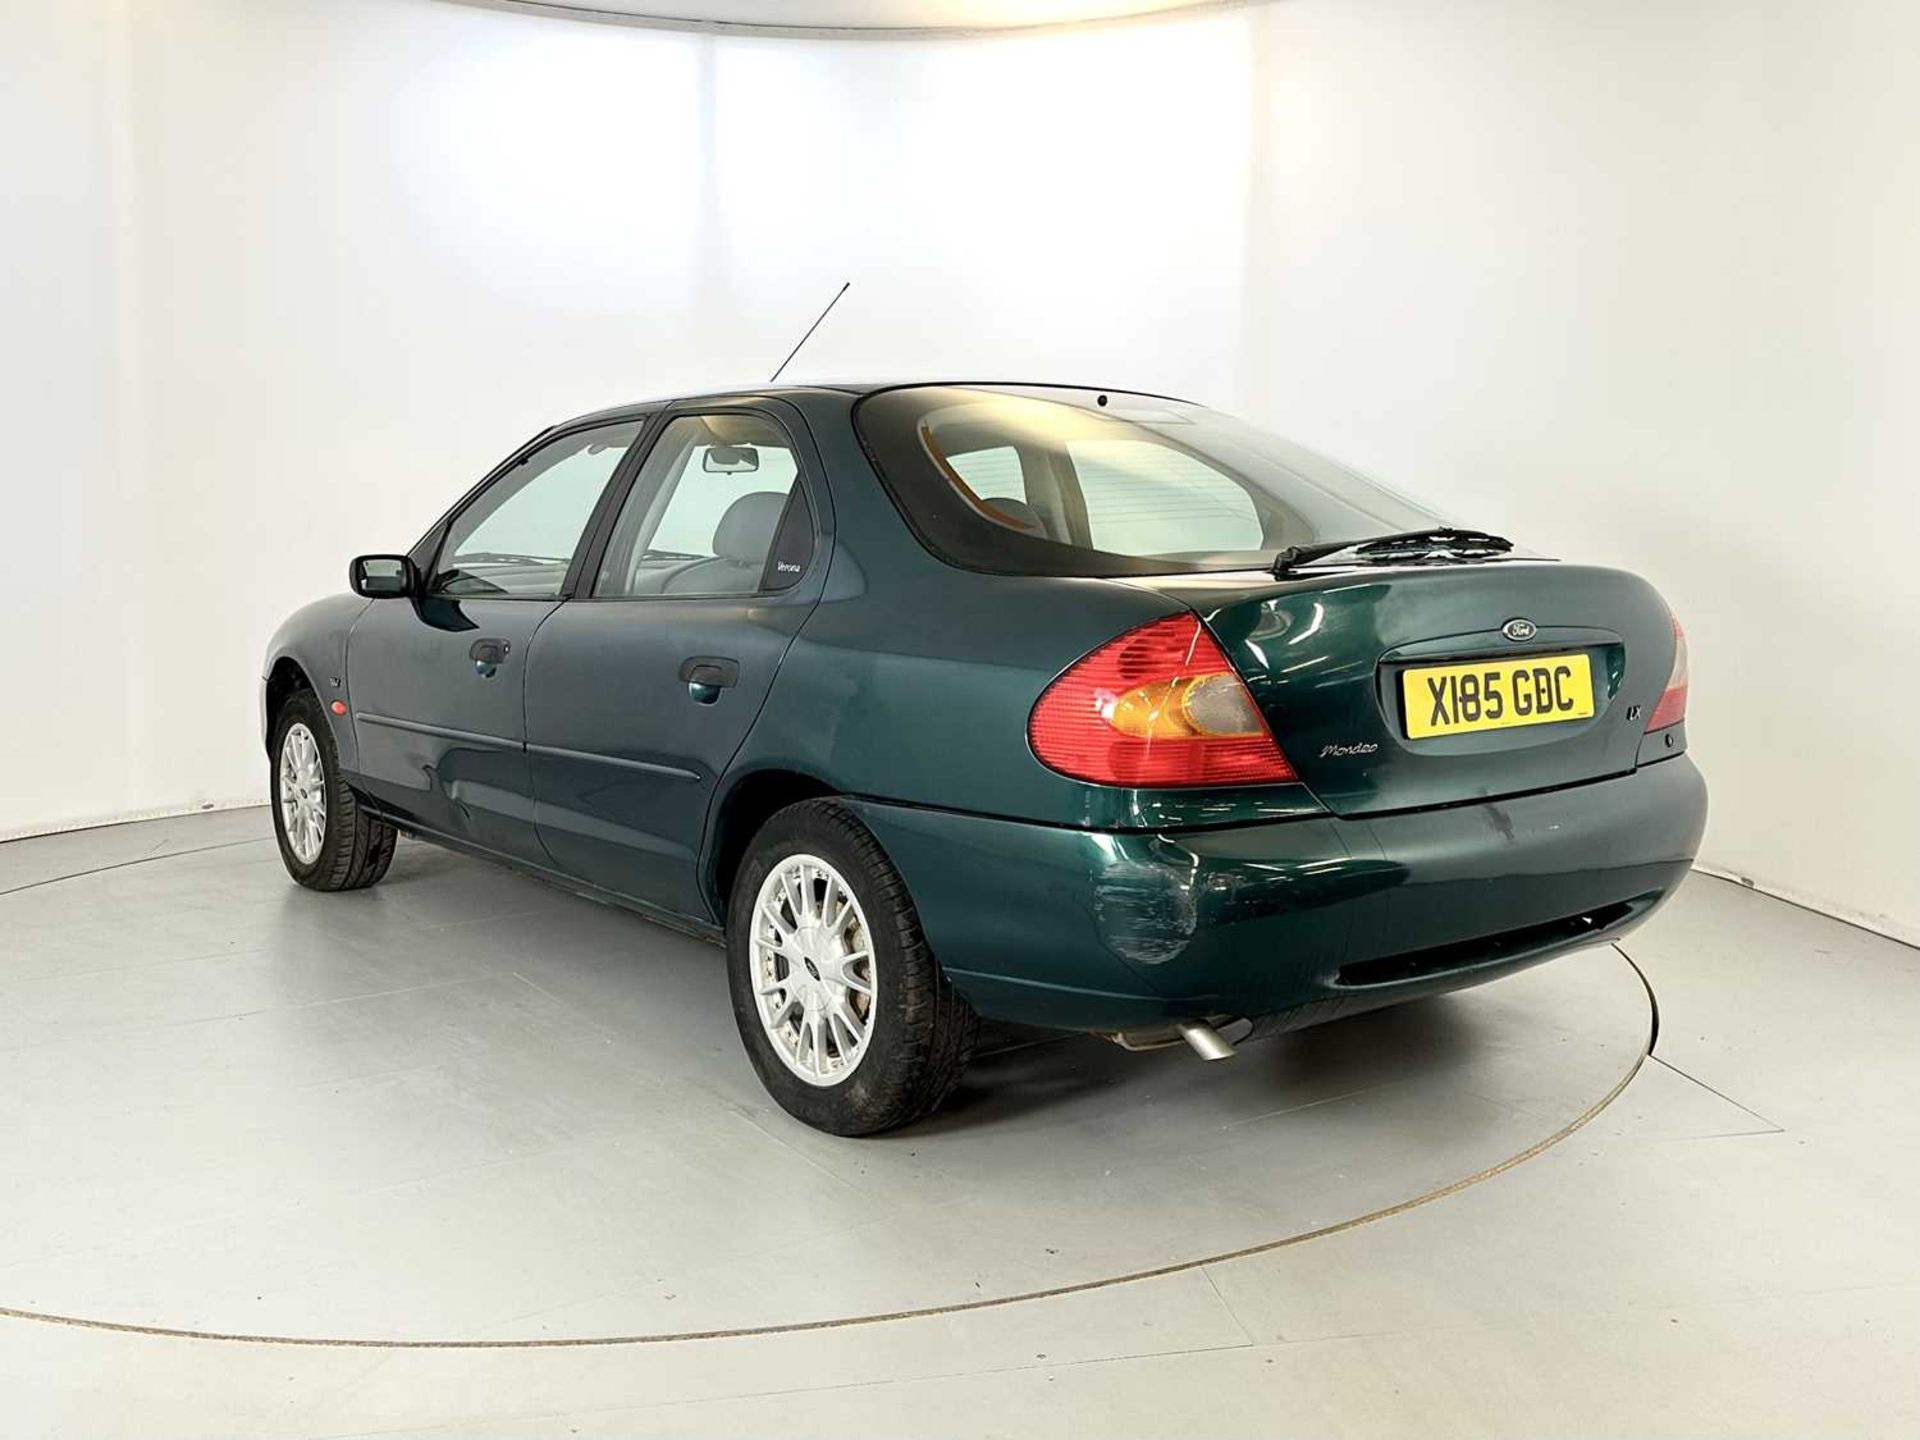 2000 Ford Mondeo 1 Owner from new & 17,000 miles - Image 7 of 34